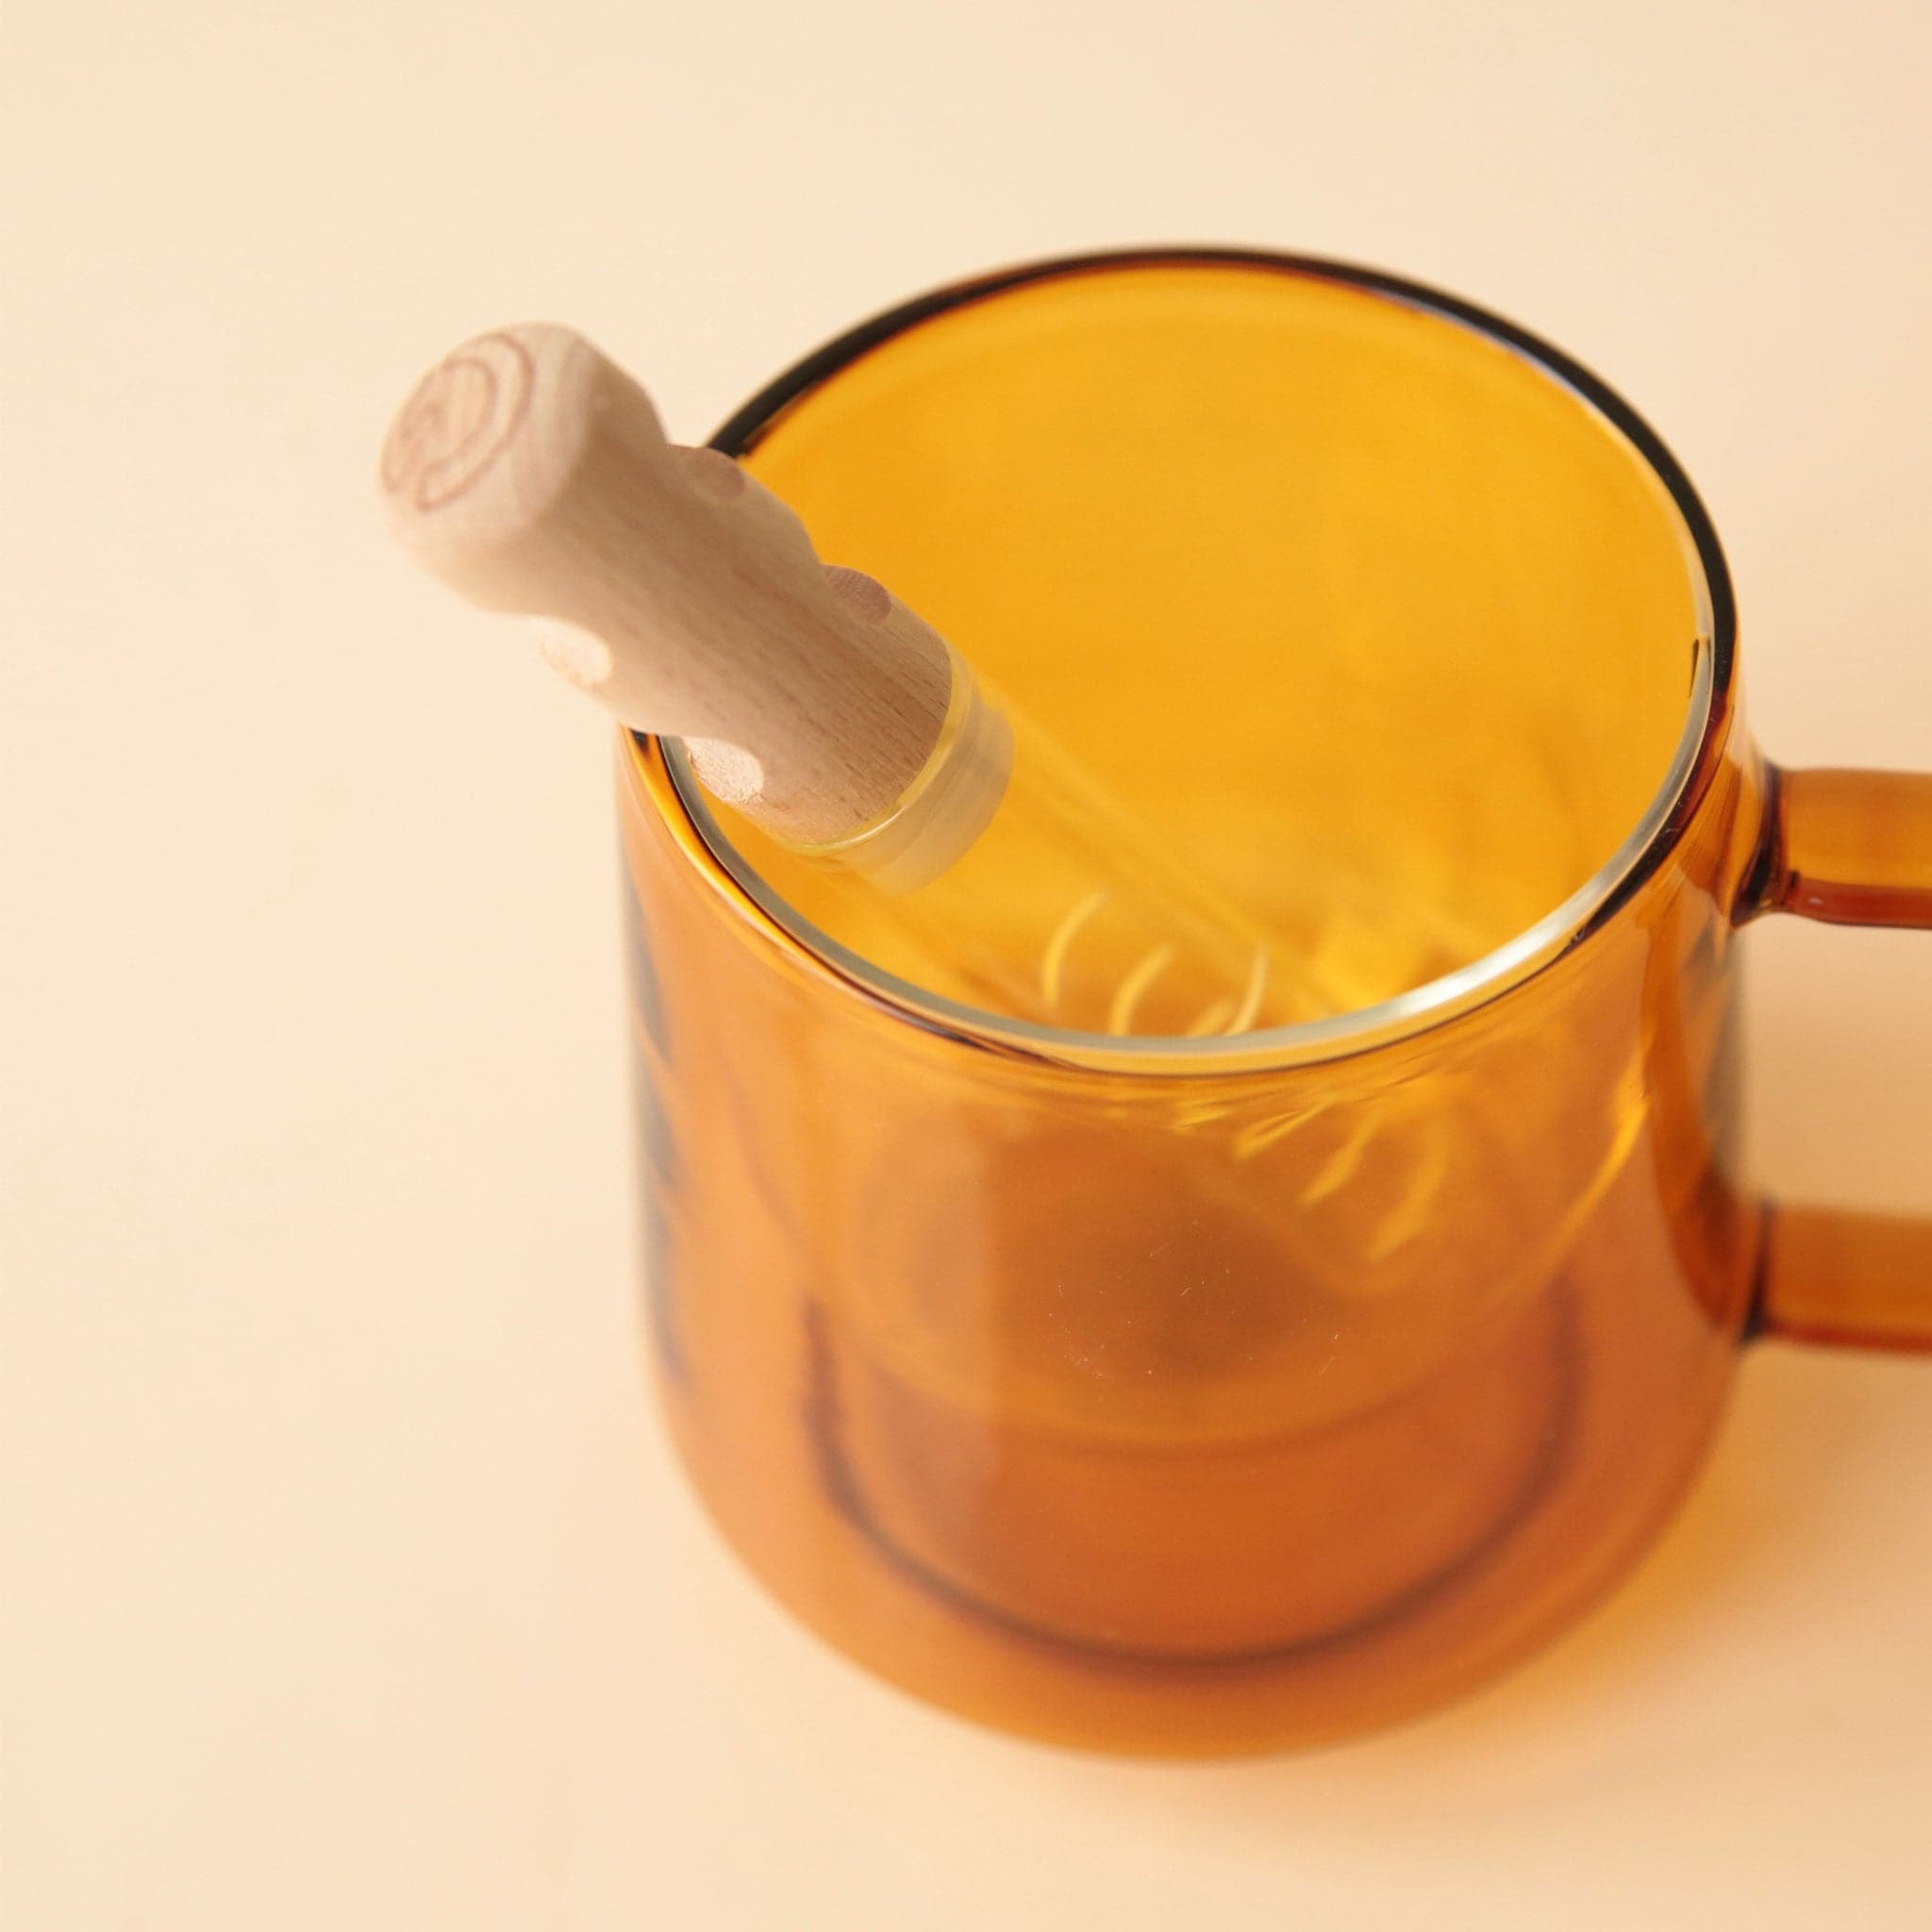 A glass tea infusing stick with 4 slender openings that allow water to seep in and infuse. The cap is made of silicone and bamboo staged inside of a glass mug. 